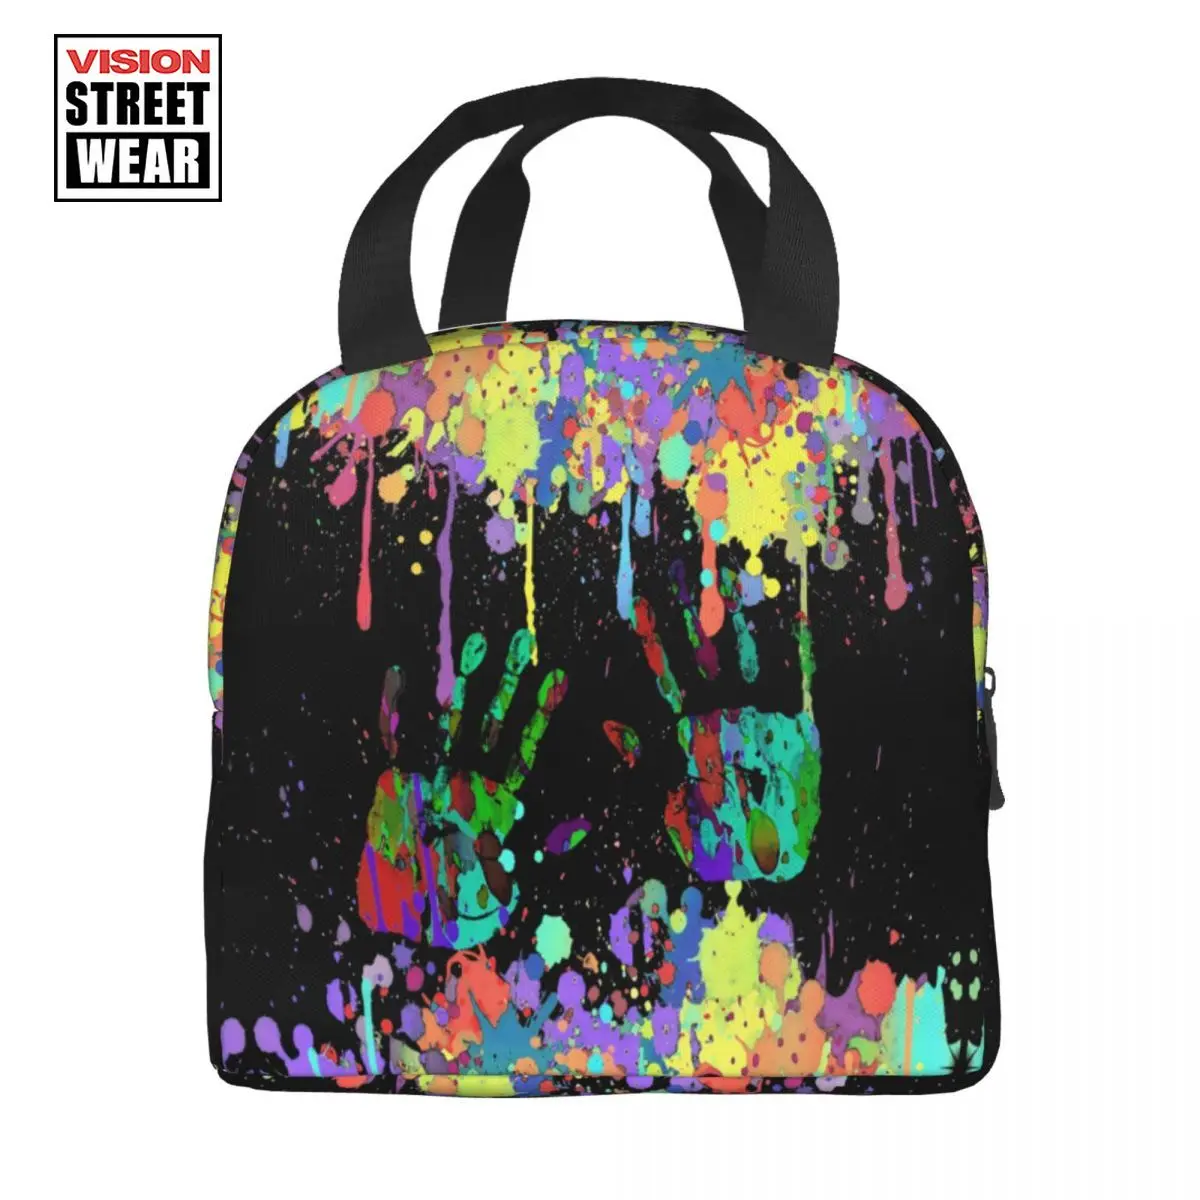 

Crazy Splashes Hands Thermal Insulated Lunch Bags Women Artist Painting Lunch Container For Work School Travel Storage Food Box